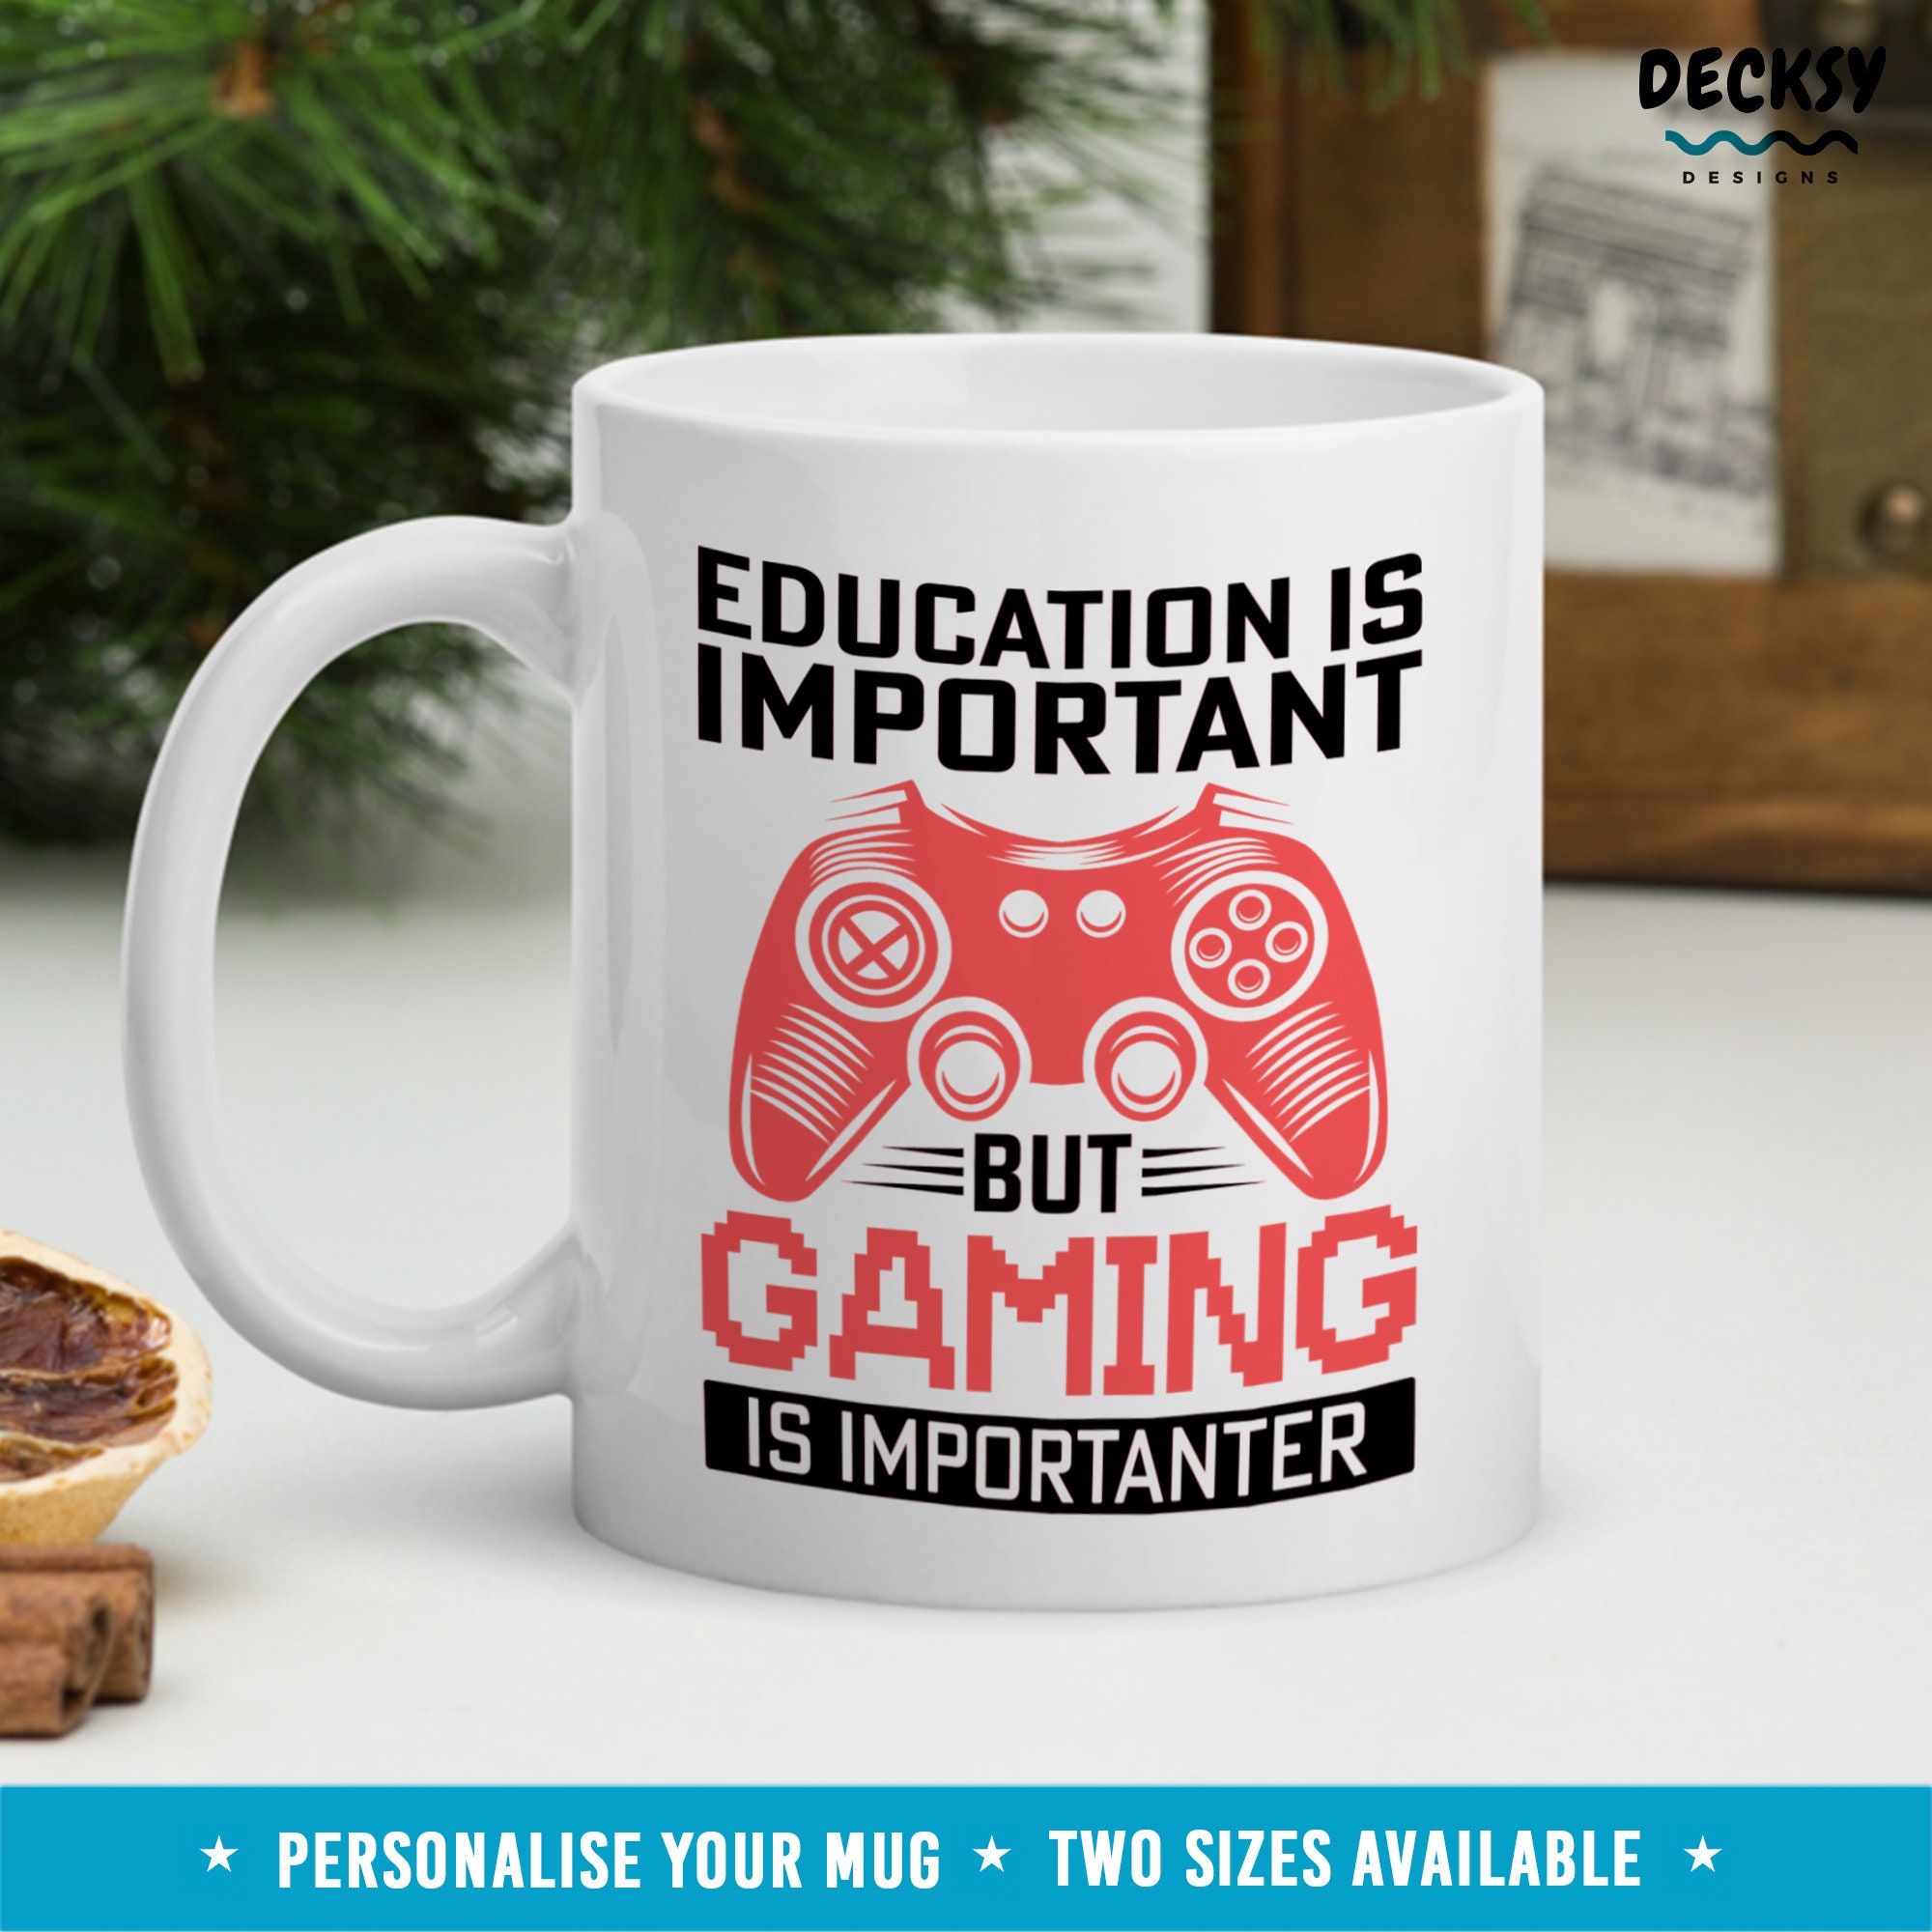 Gamer Gifts, Boyfriend Valentines Day Gift for Him Funny Unique